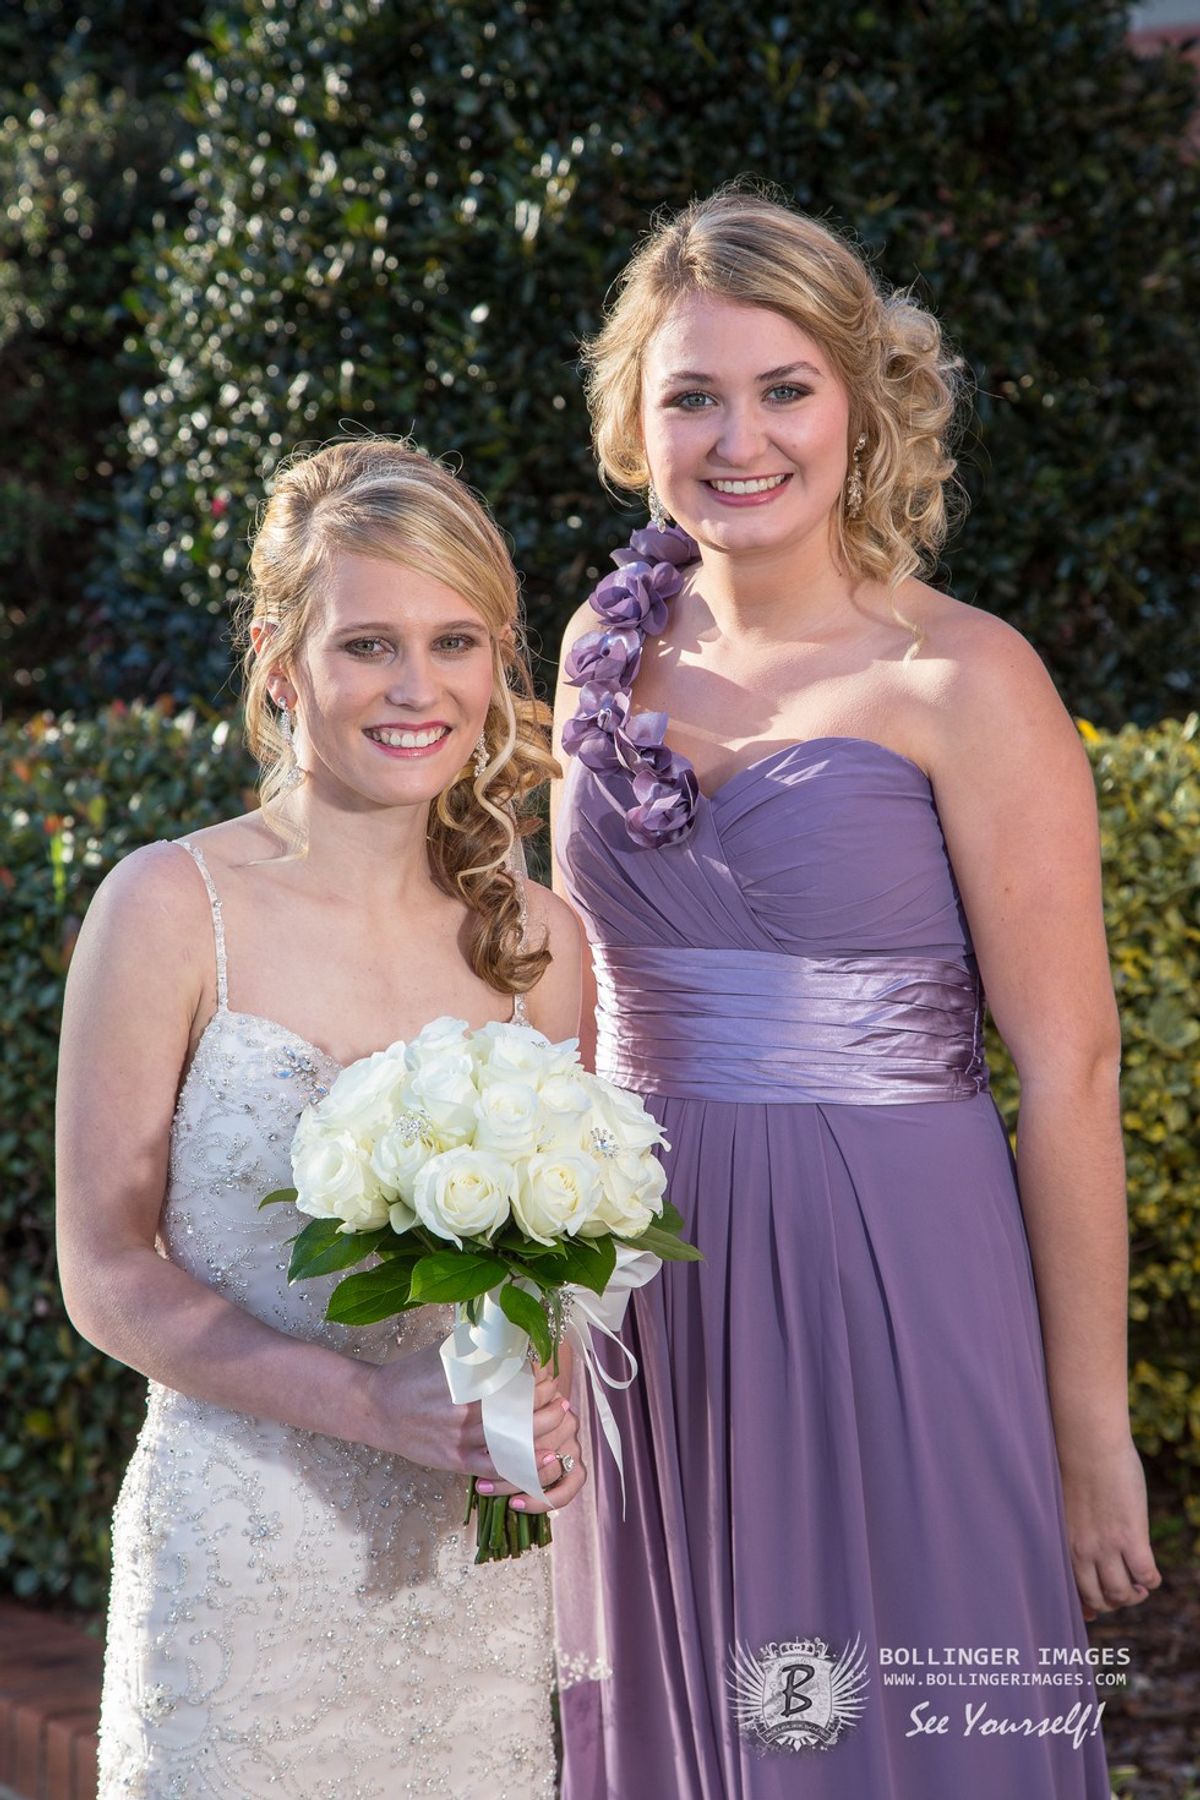 An Open Letter To My Best Friend On Her Wedding Day